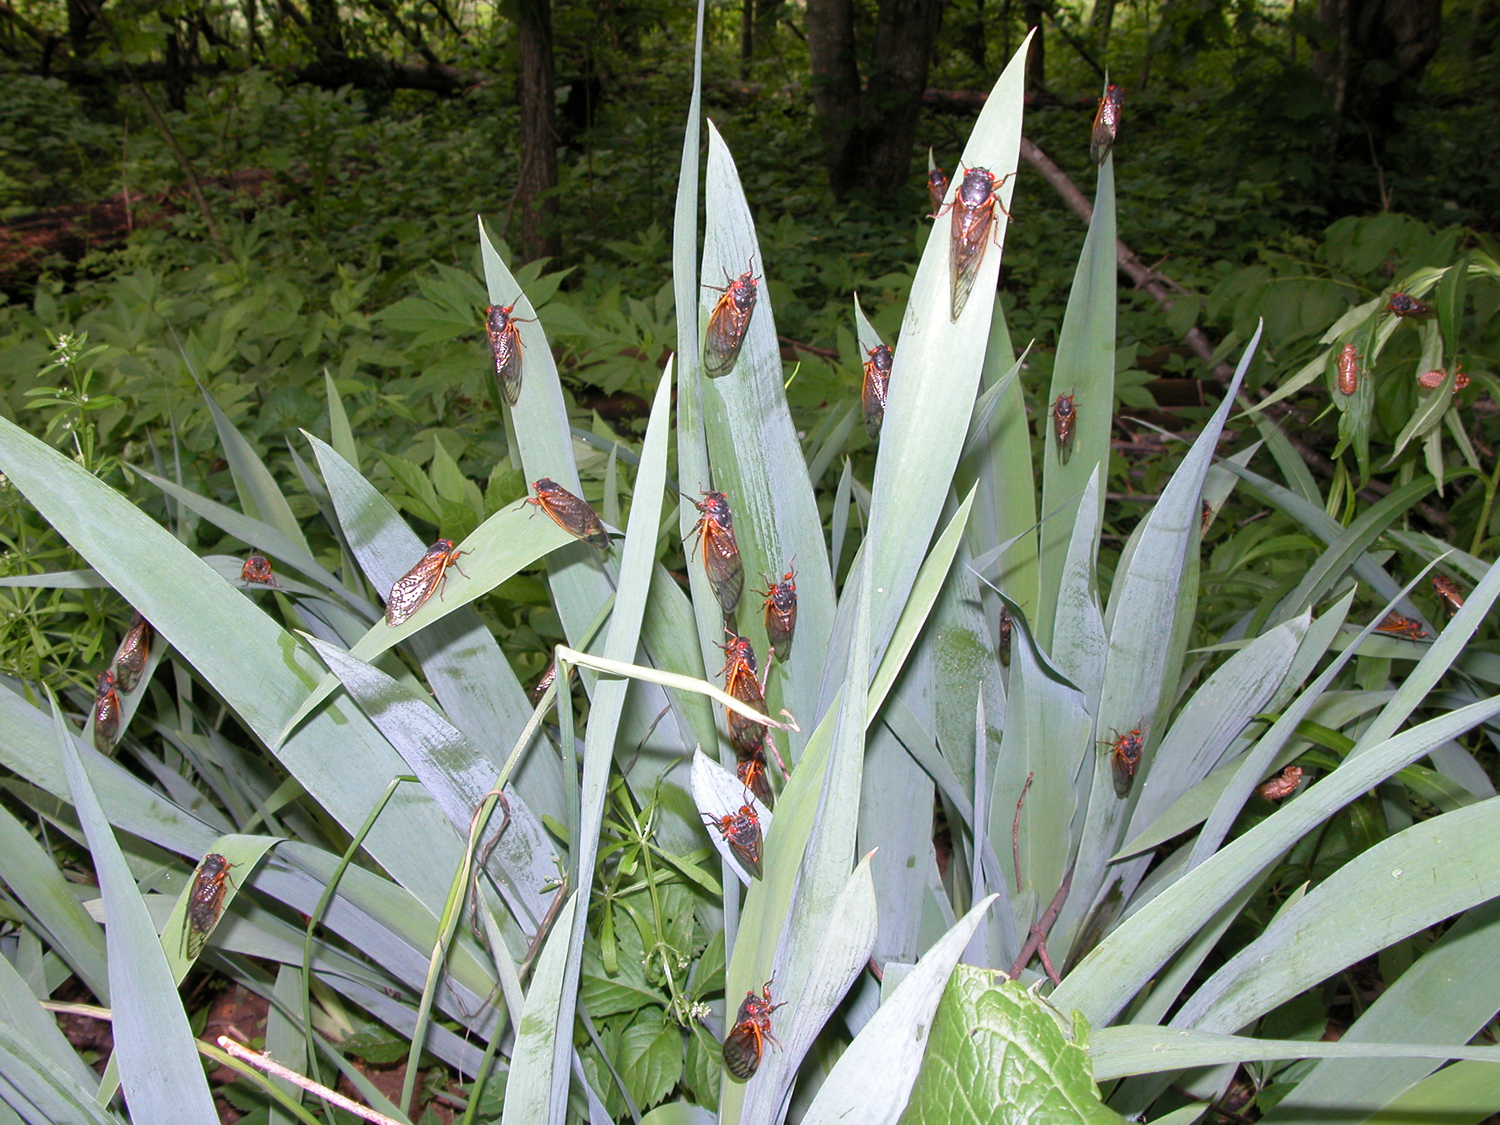  A large group of cicadas rest on iris leaves.